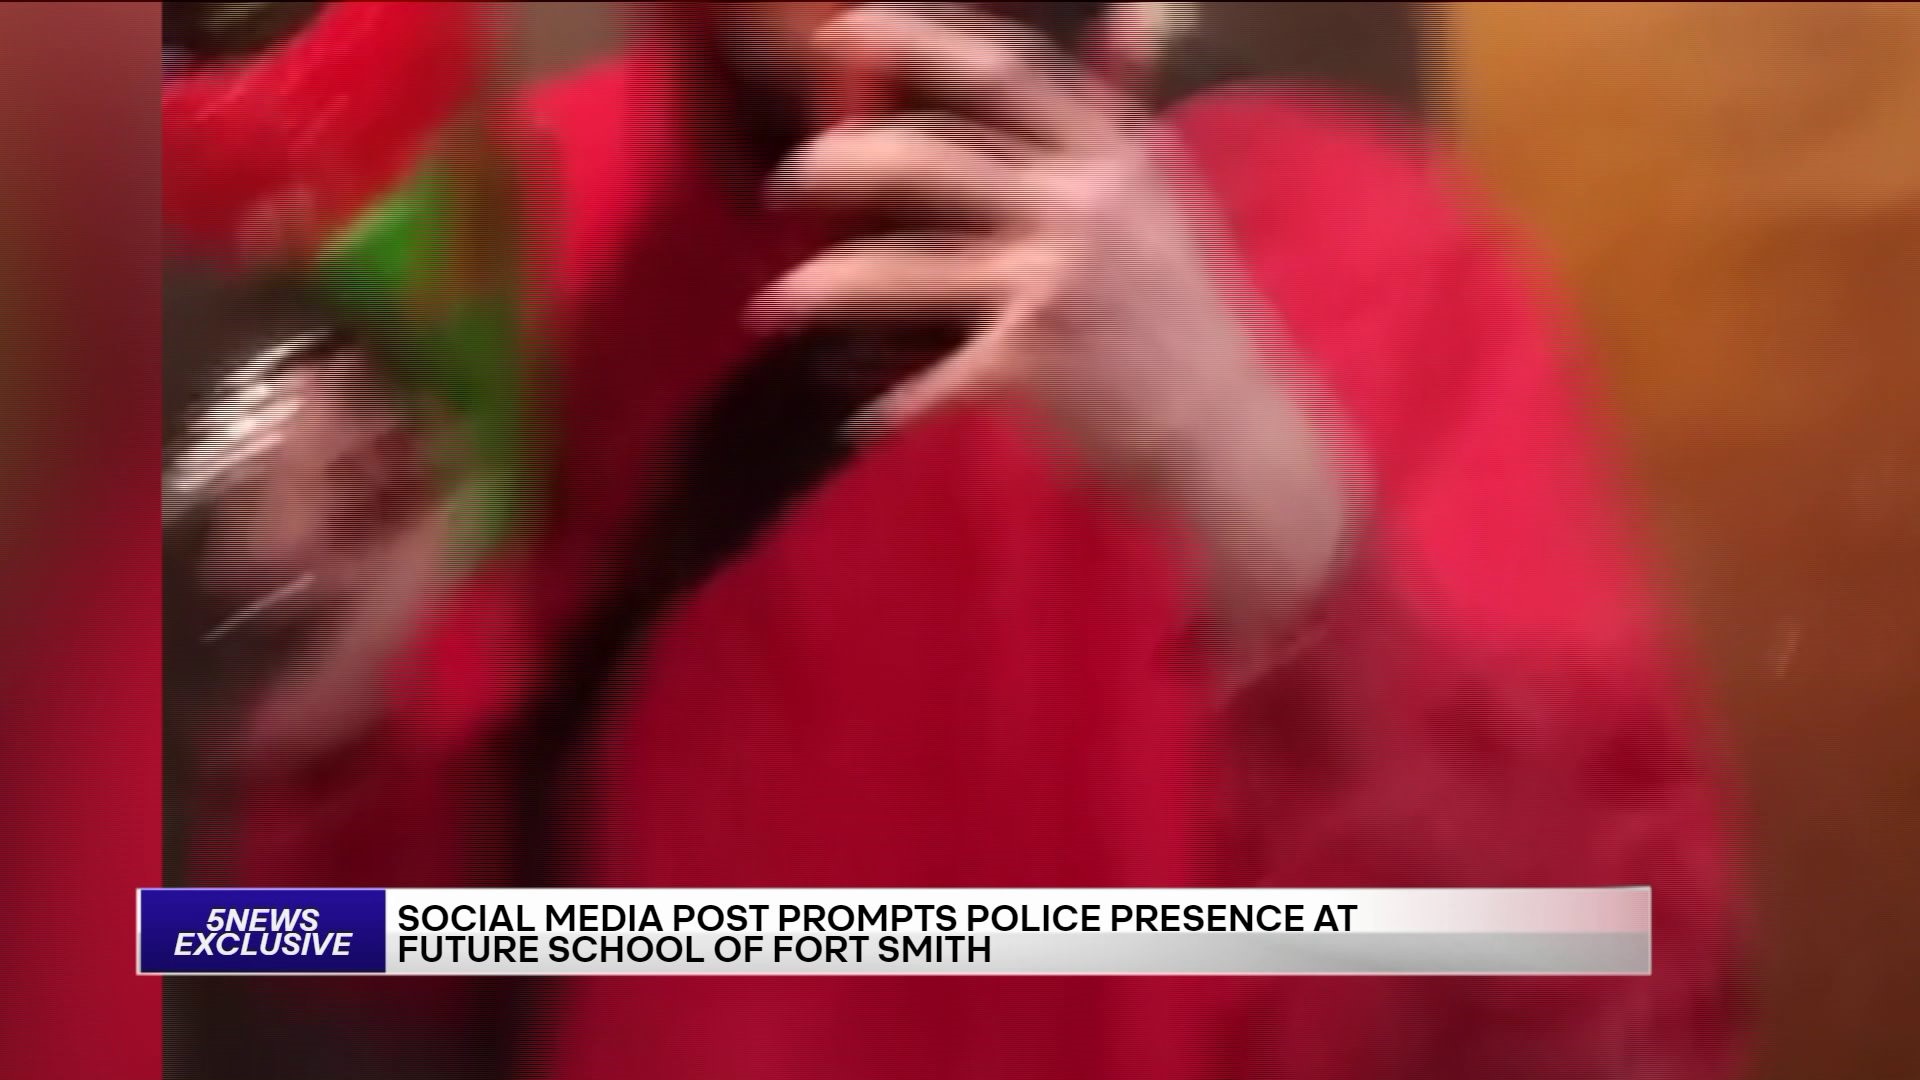 Social Media Post Prompts Police Presence At Future School of Fort Smith